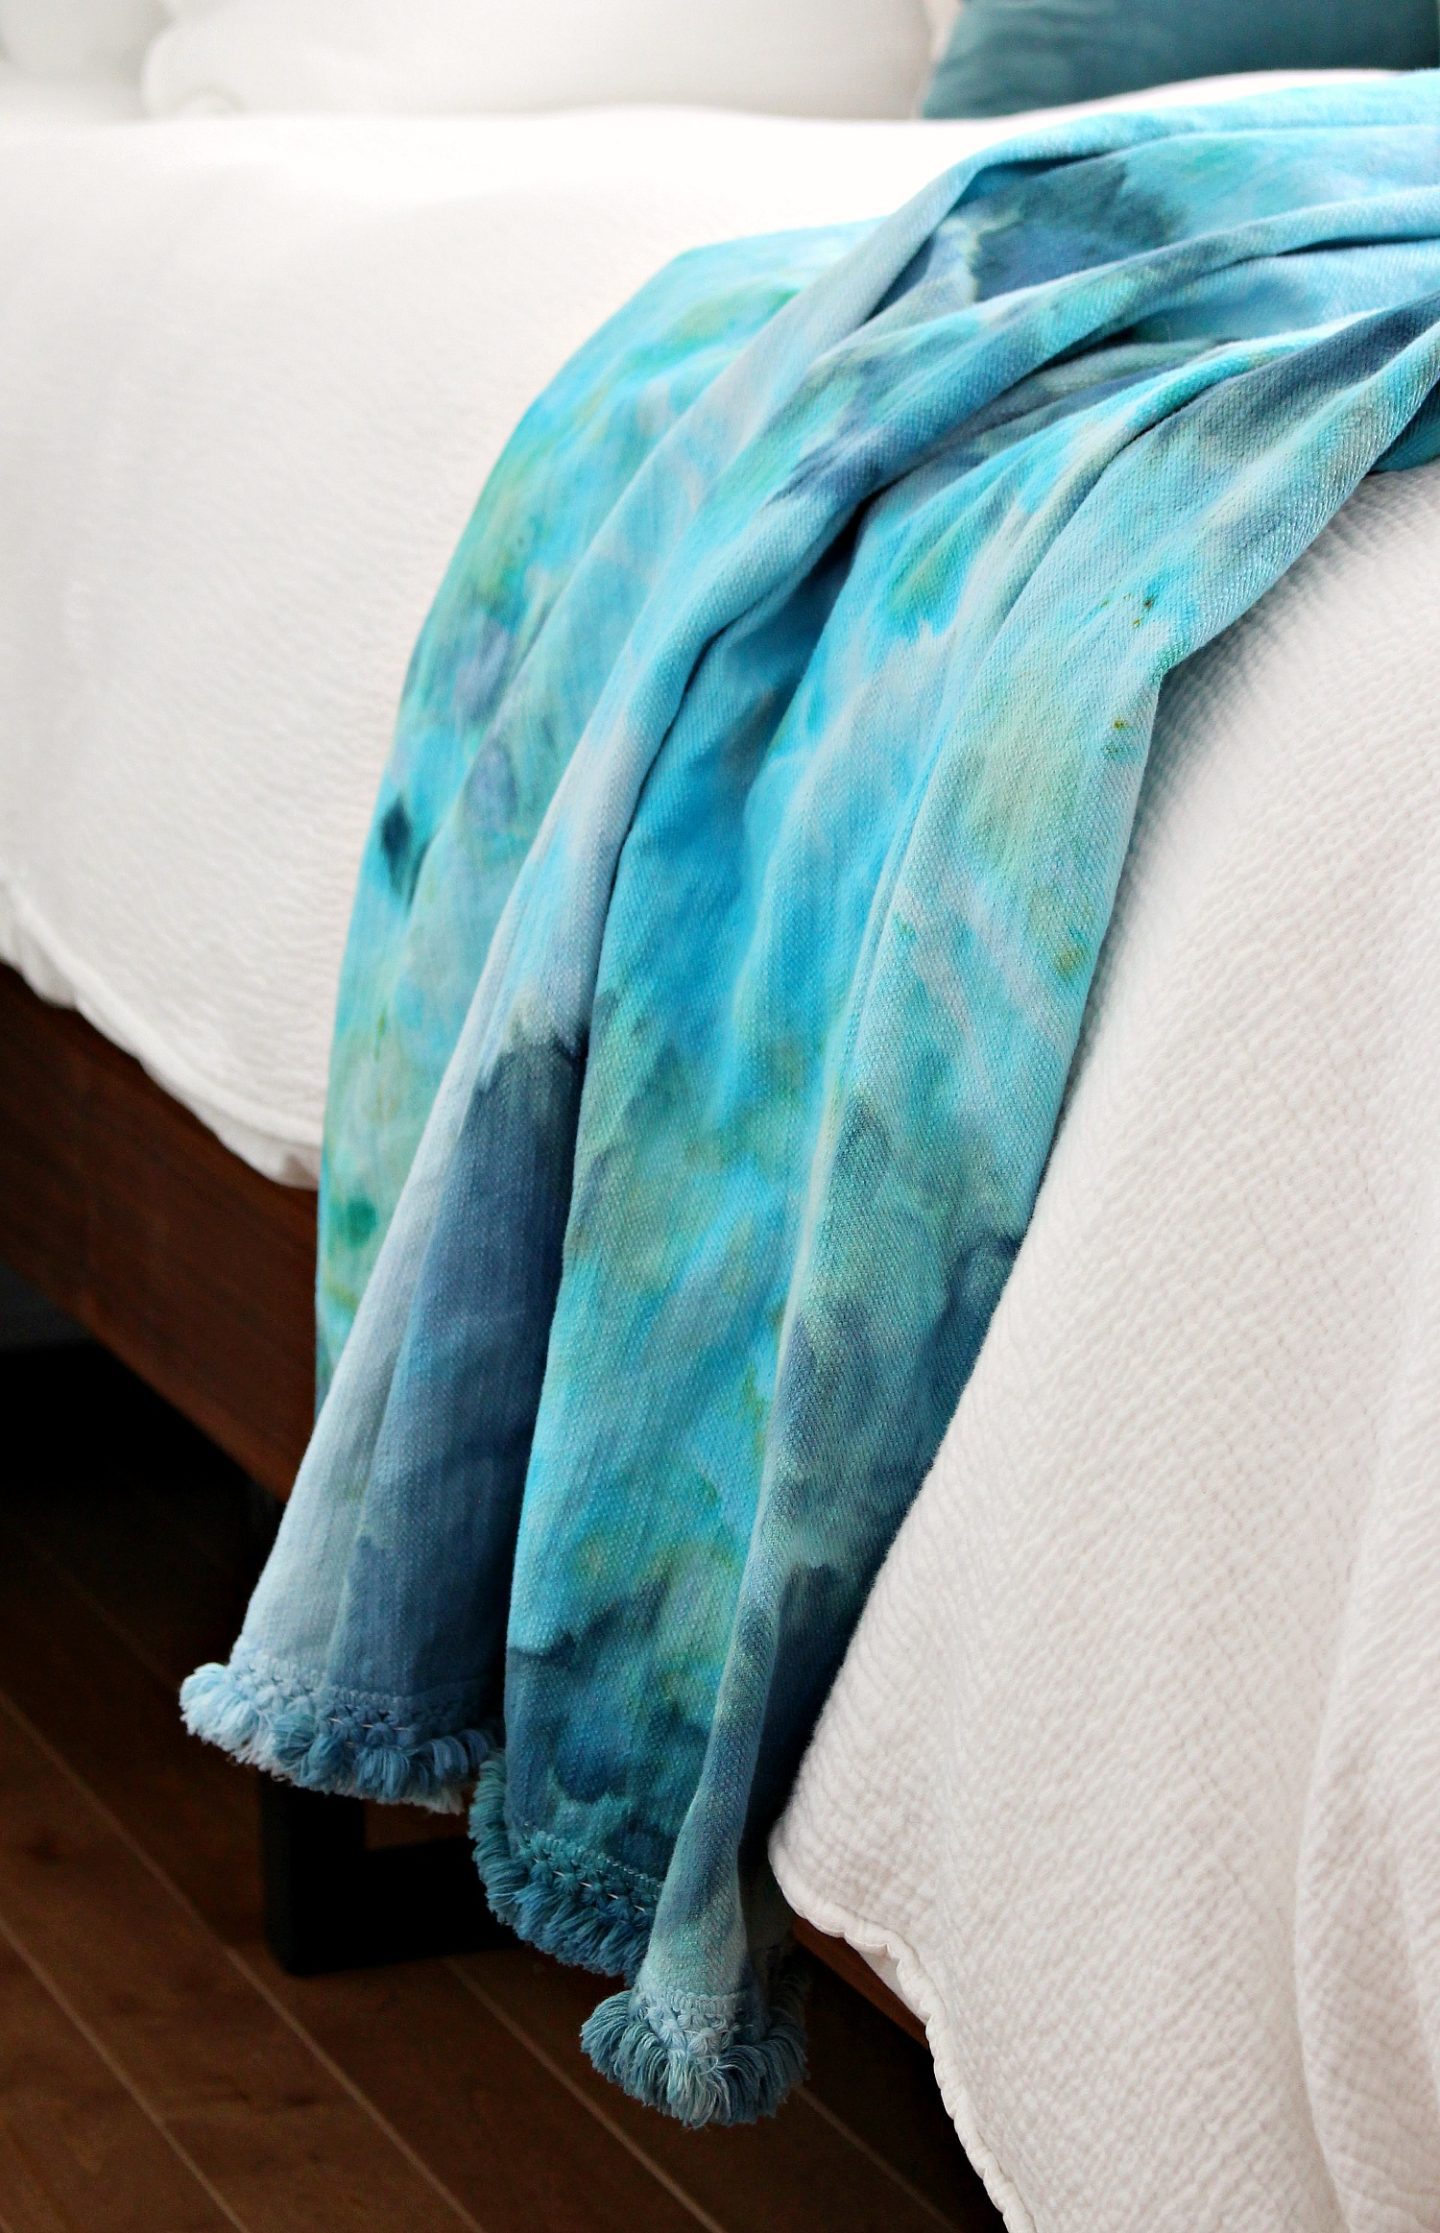 10 DIY Tie Dye Projects to Make + featured by Top US Craft Blog + The Pretty Life Girls: Ice Dyed Throw Blanket